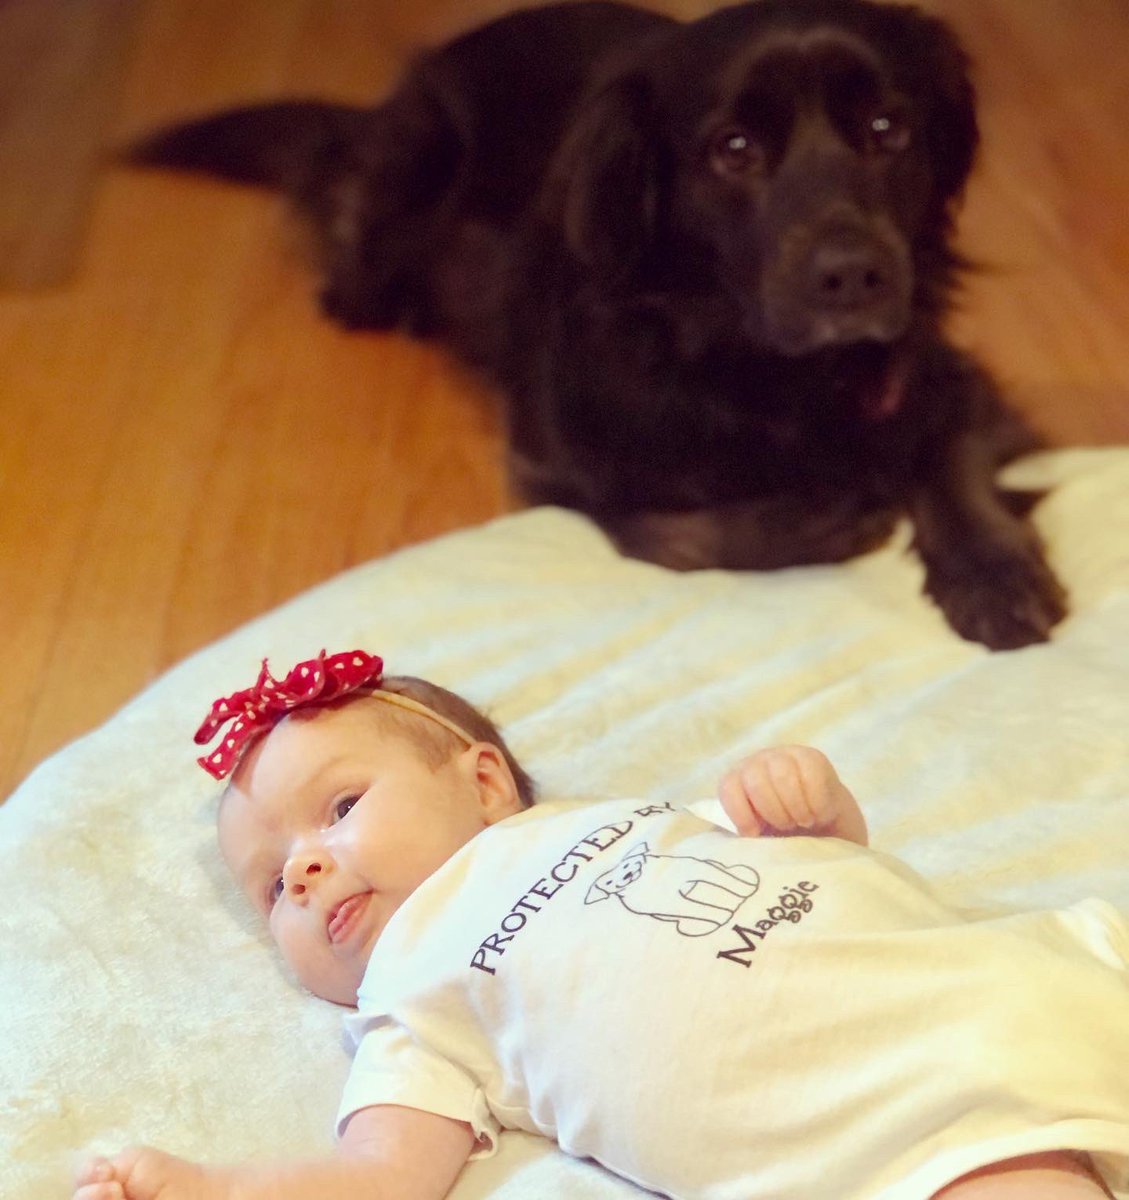 It’s been 1 month since Molly entered our world! My wife and I are loving parenthood, and our dog Maggie is loving her new best friend! #ncpol #newparent #1monthold #dingeefornc #ncauditor